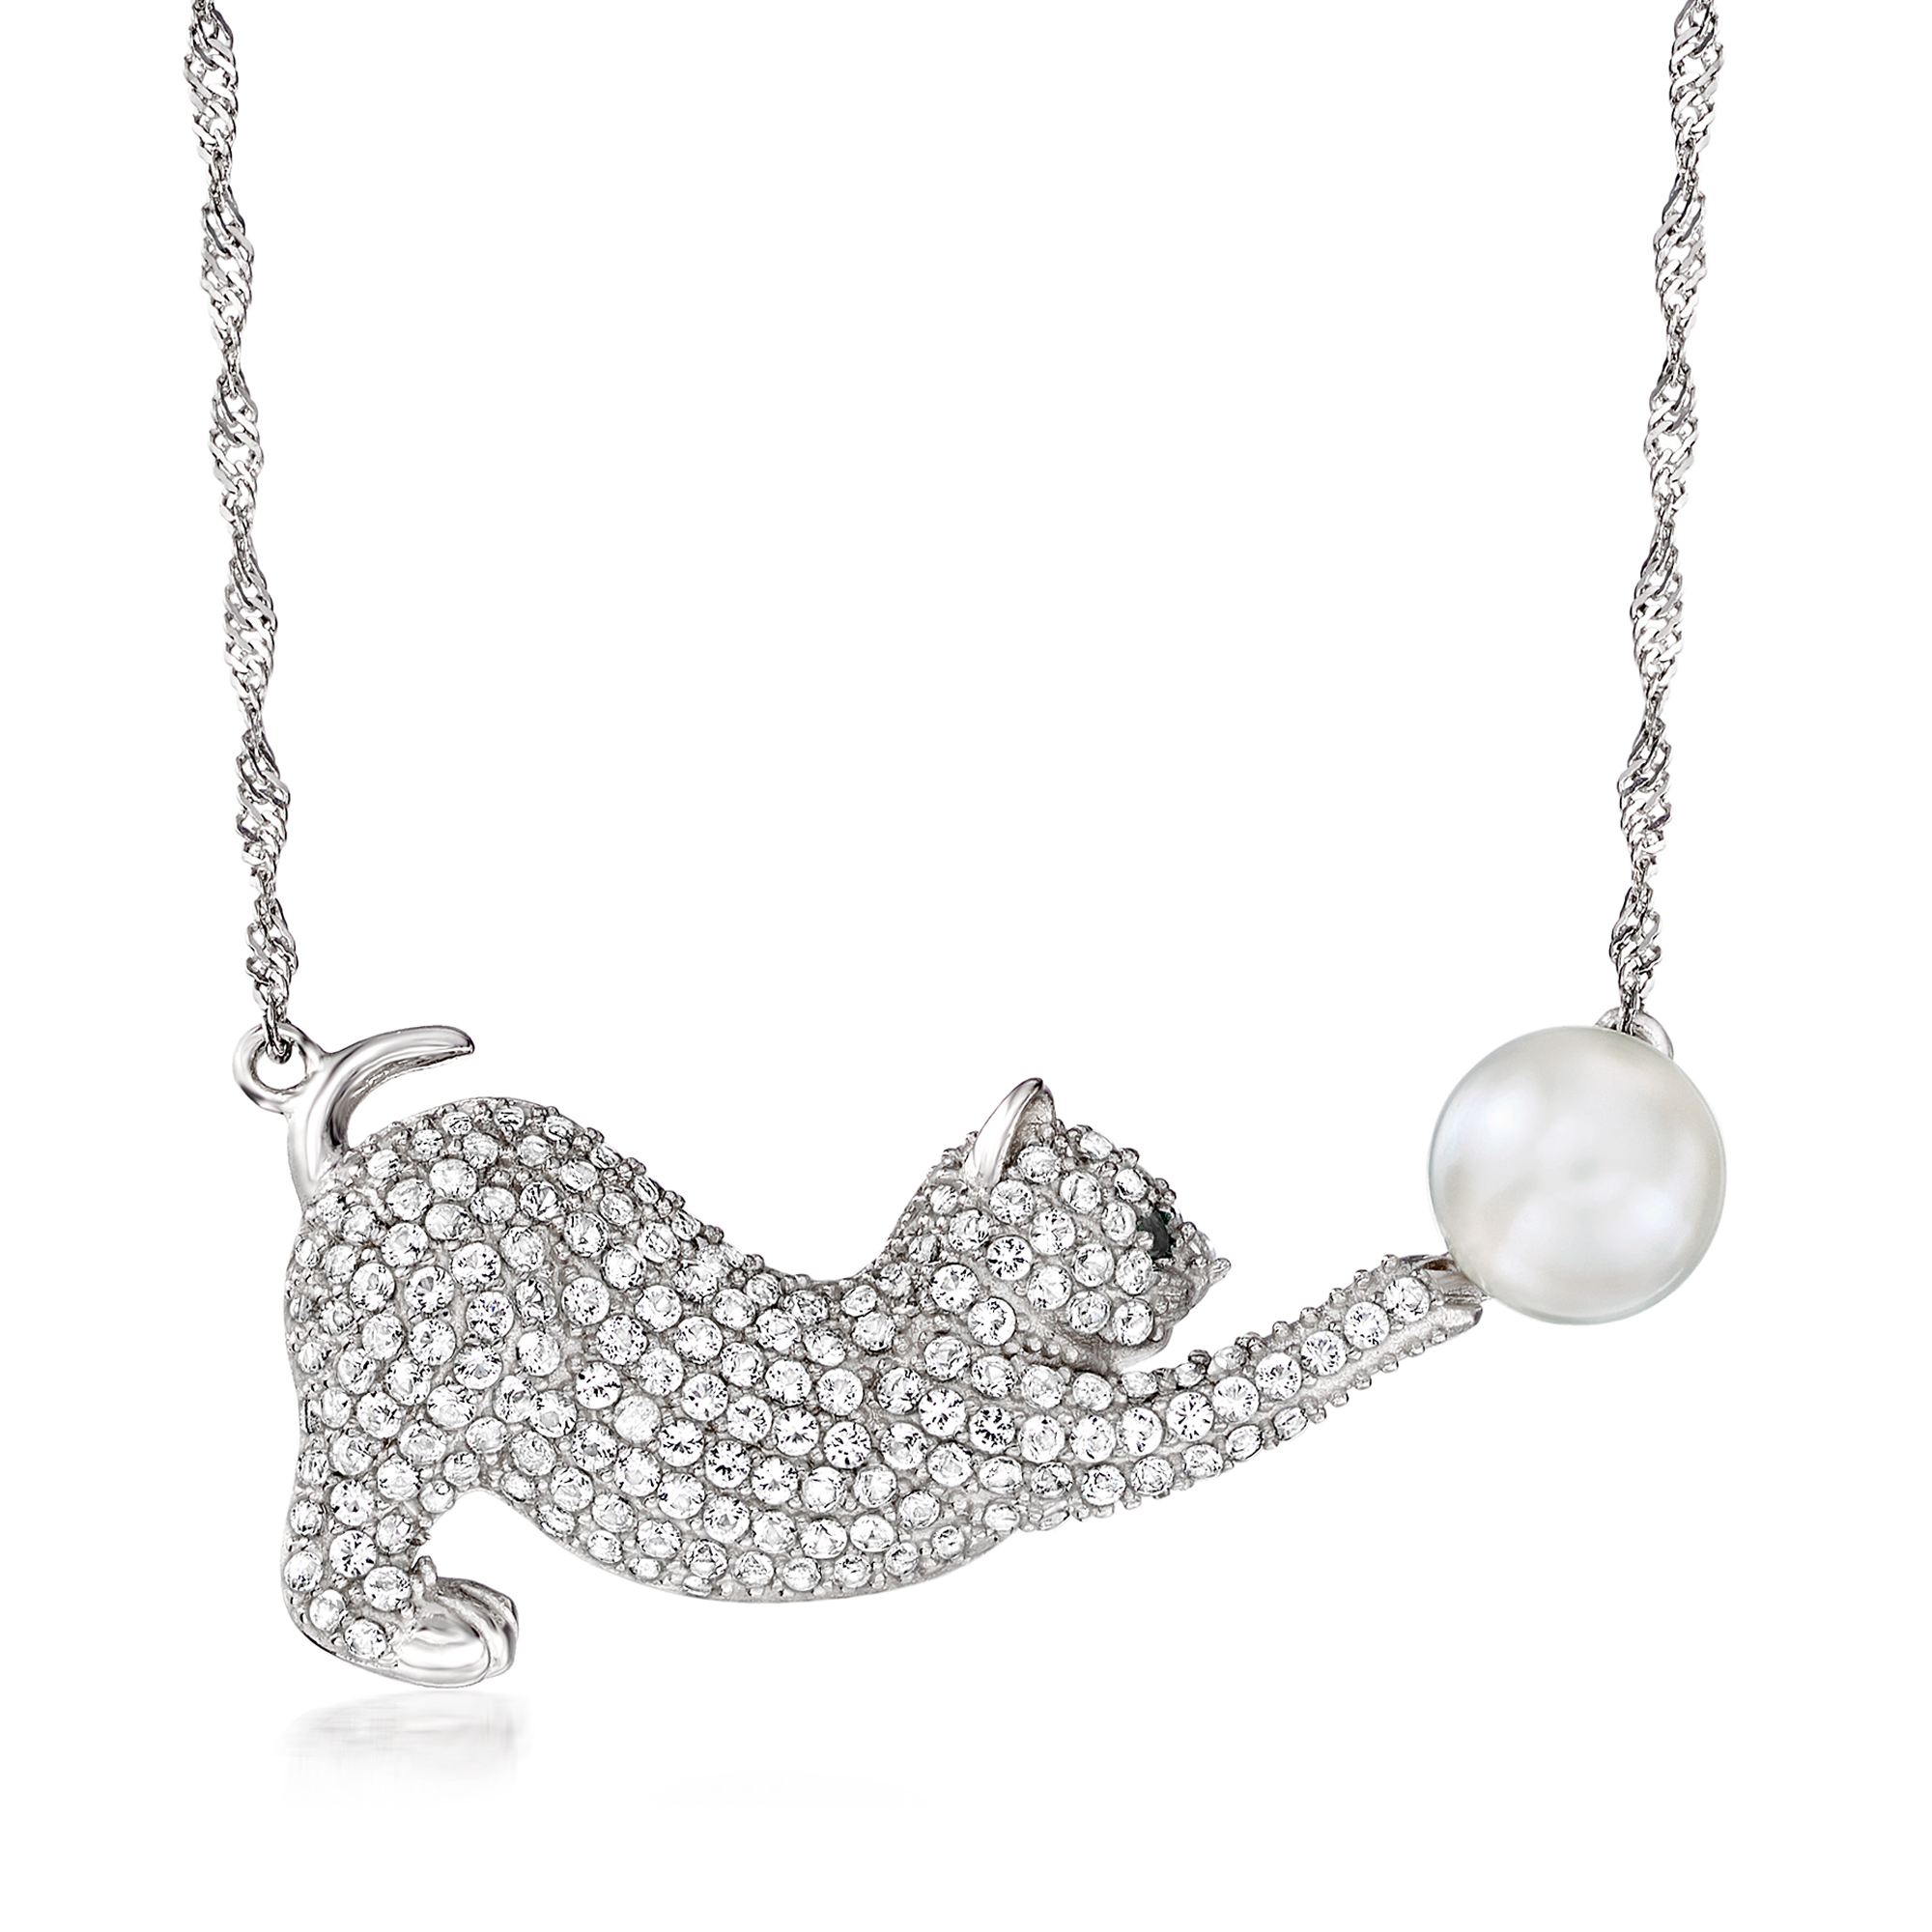 8mm Cultured Pearl and 1.80 ct. t.w. White Topaz Cat Necklace in Sterling  Silver with Black Spinel Accent | Ross-Simons